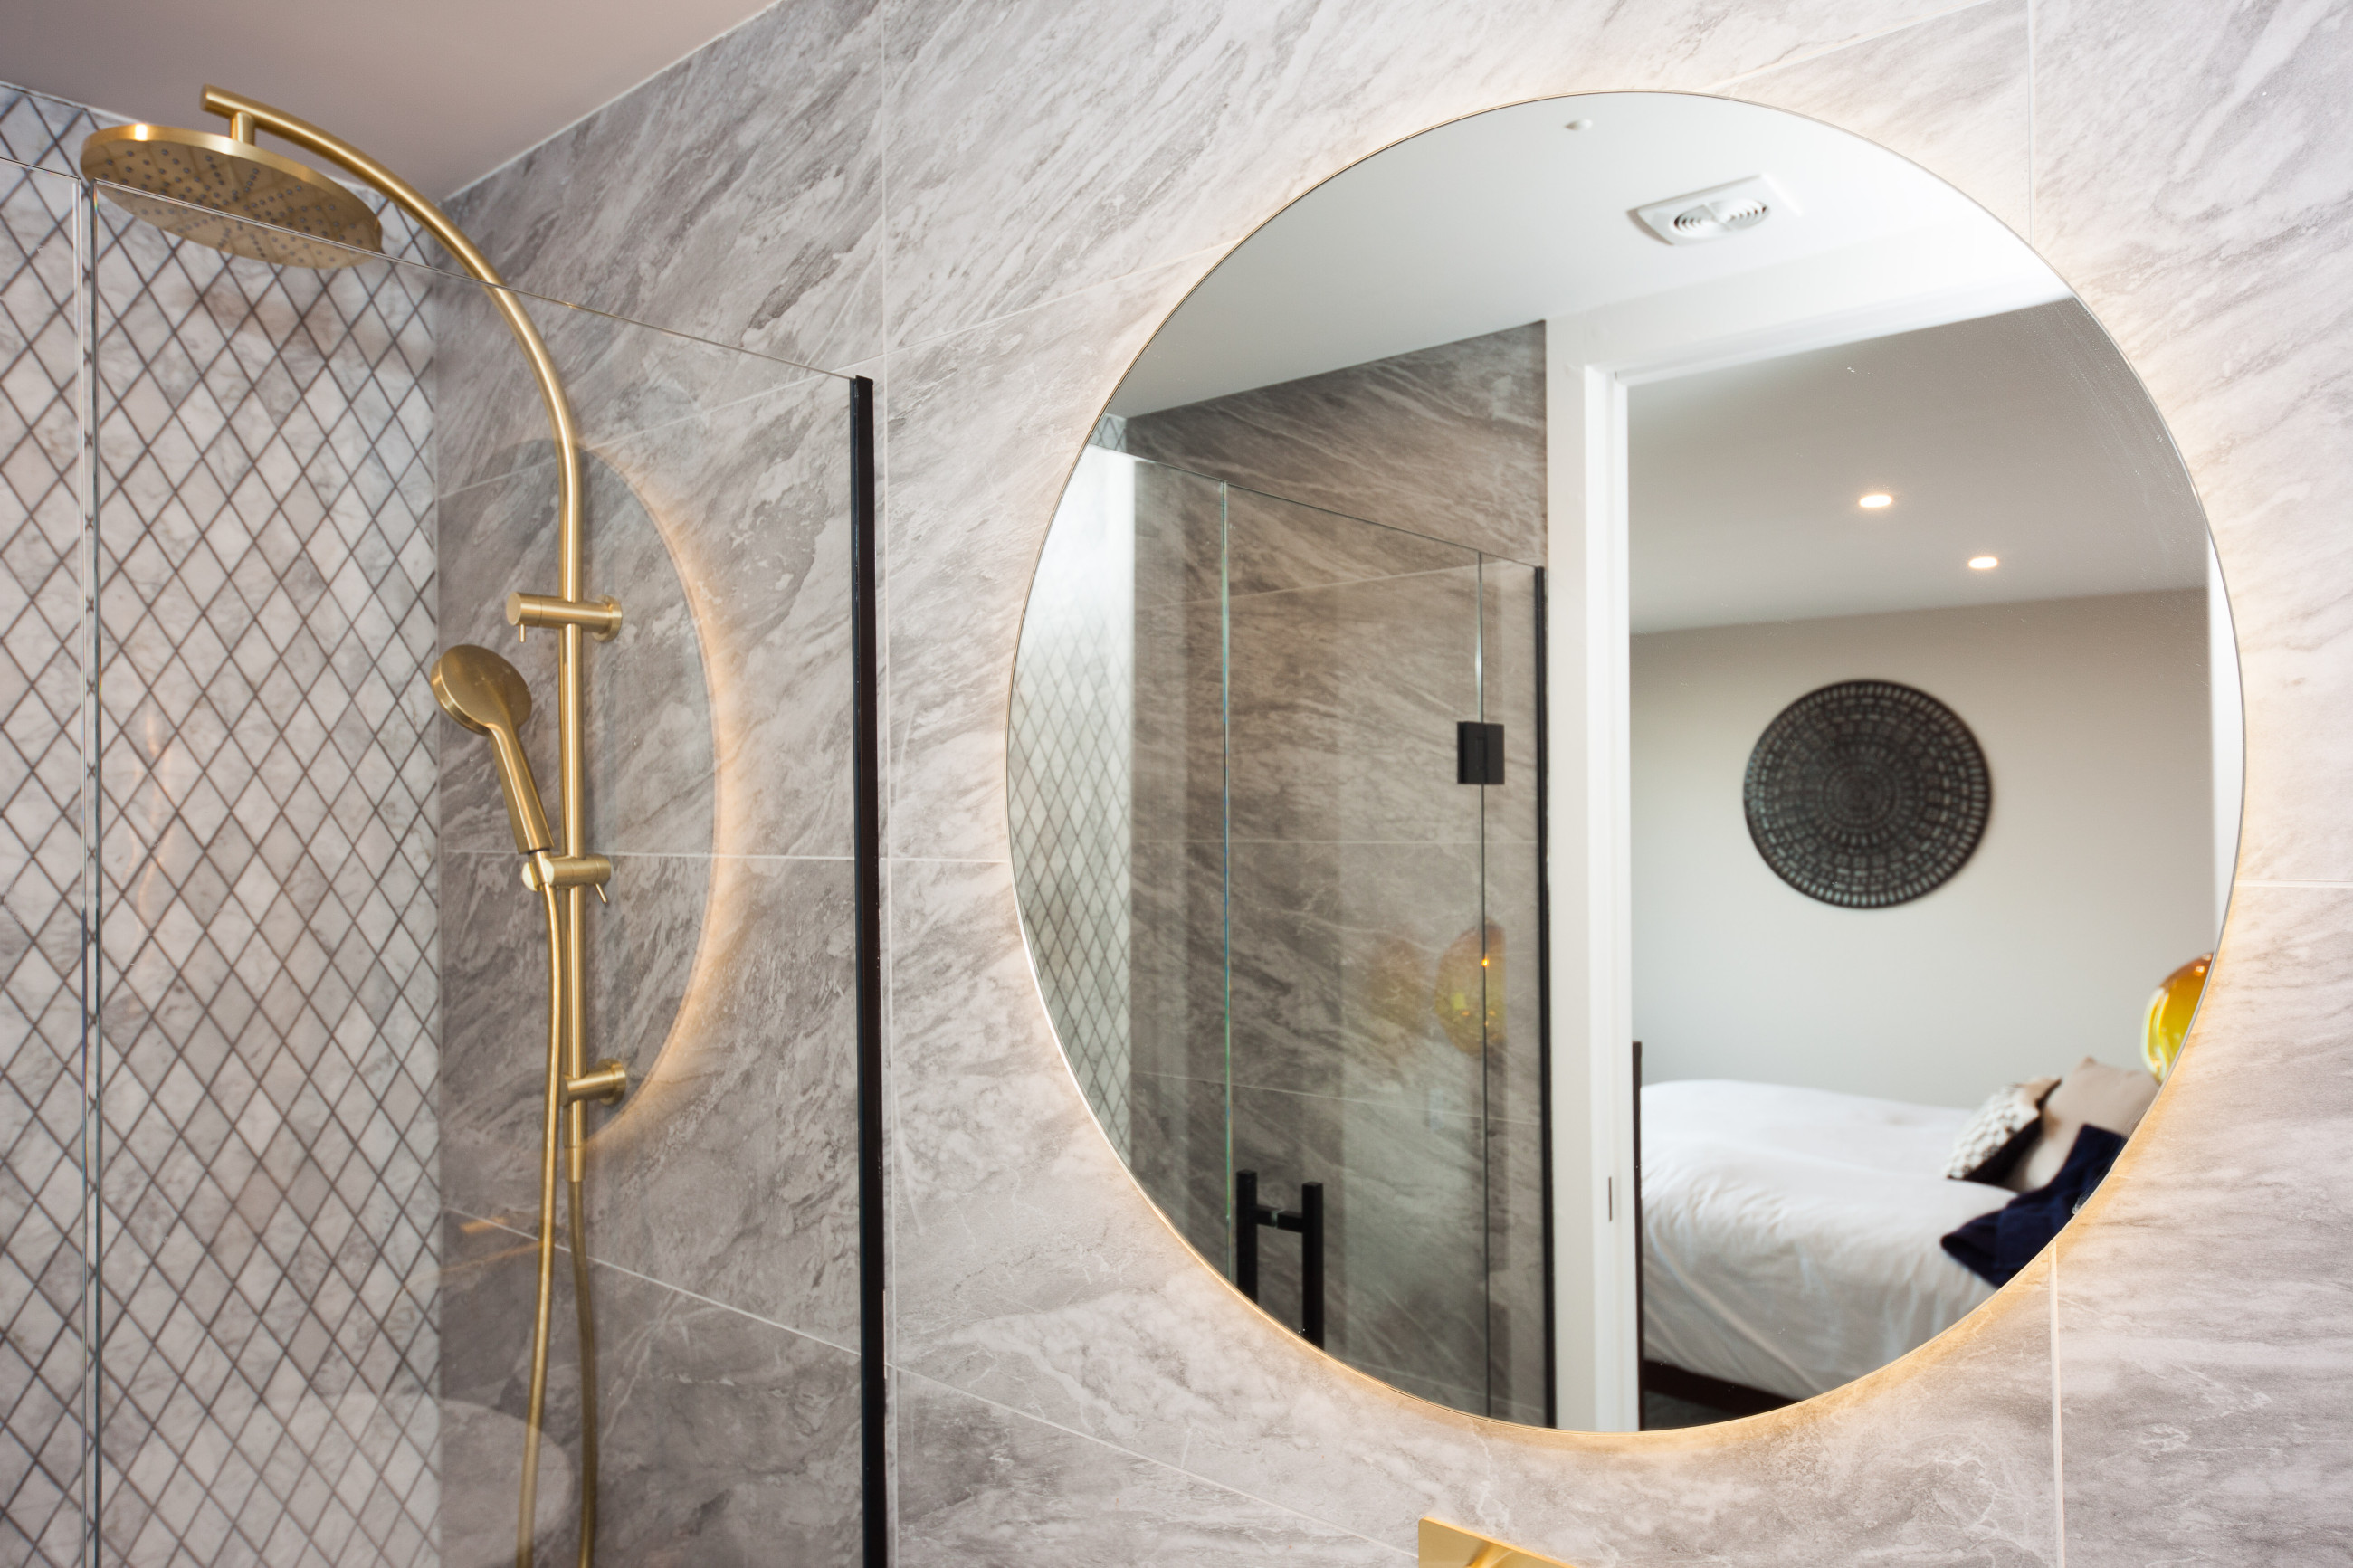 Elegant modern bathroom mirror in patterned bathroom with gold features